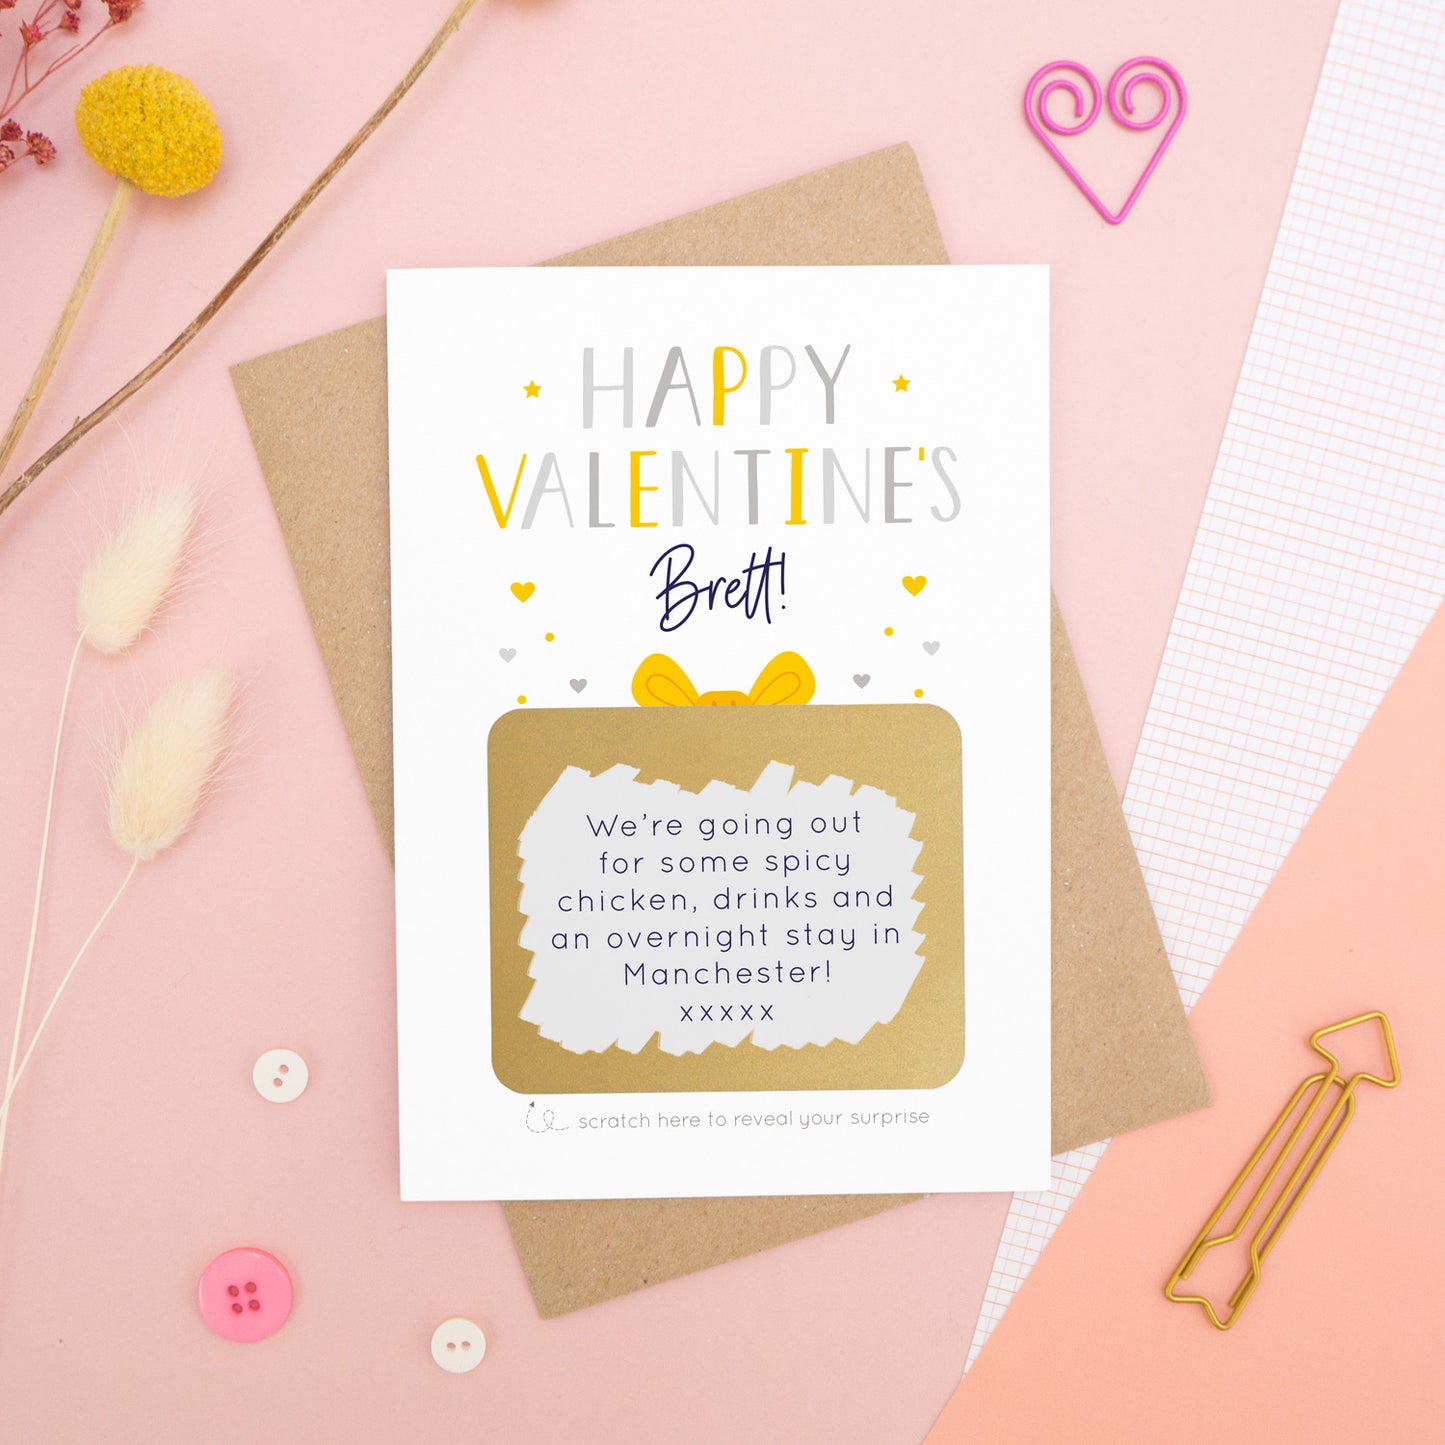 A personalised happy Valentine’s scratch card photographed on a pink background with floral props, paper clips, and buttons. The card has been scratched off to reveal the hidden message and is in the yellow and grey colour scheme.